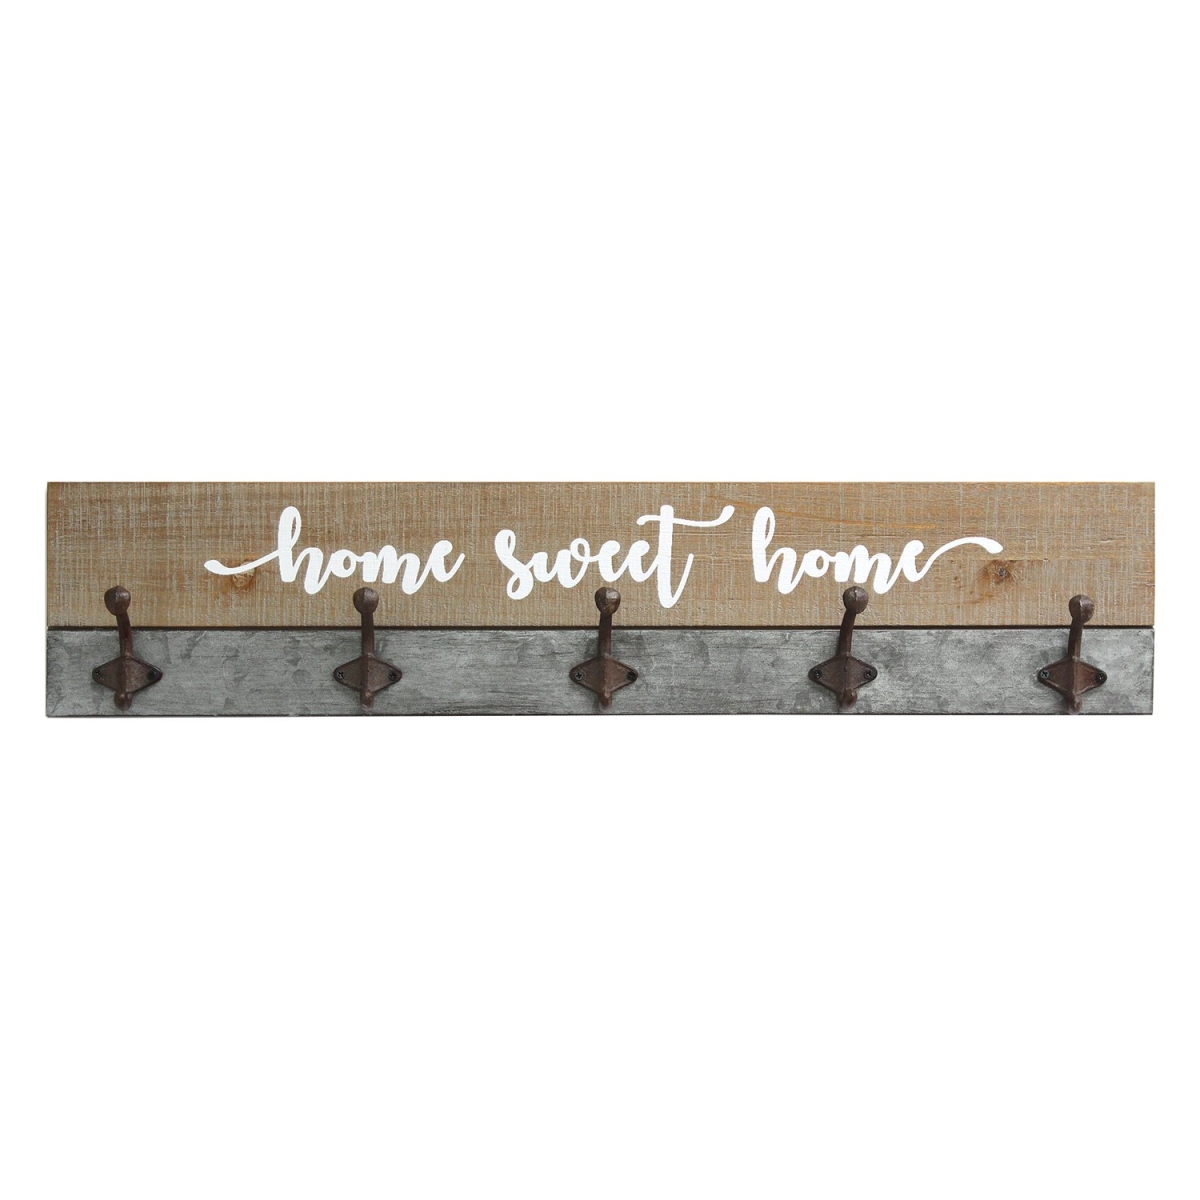 Home Roots 321270 Rustic Home Sweet Home Hooks, Distressed Wood, Metal & White